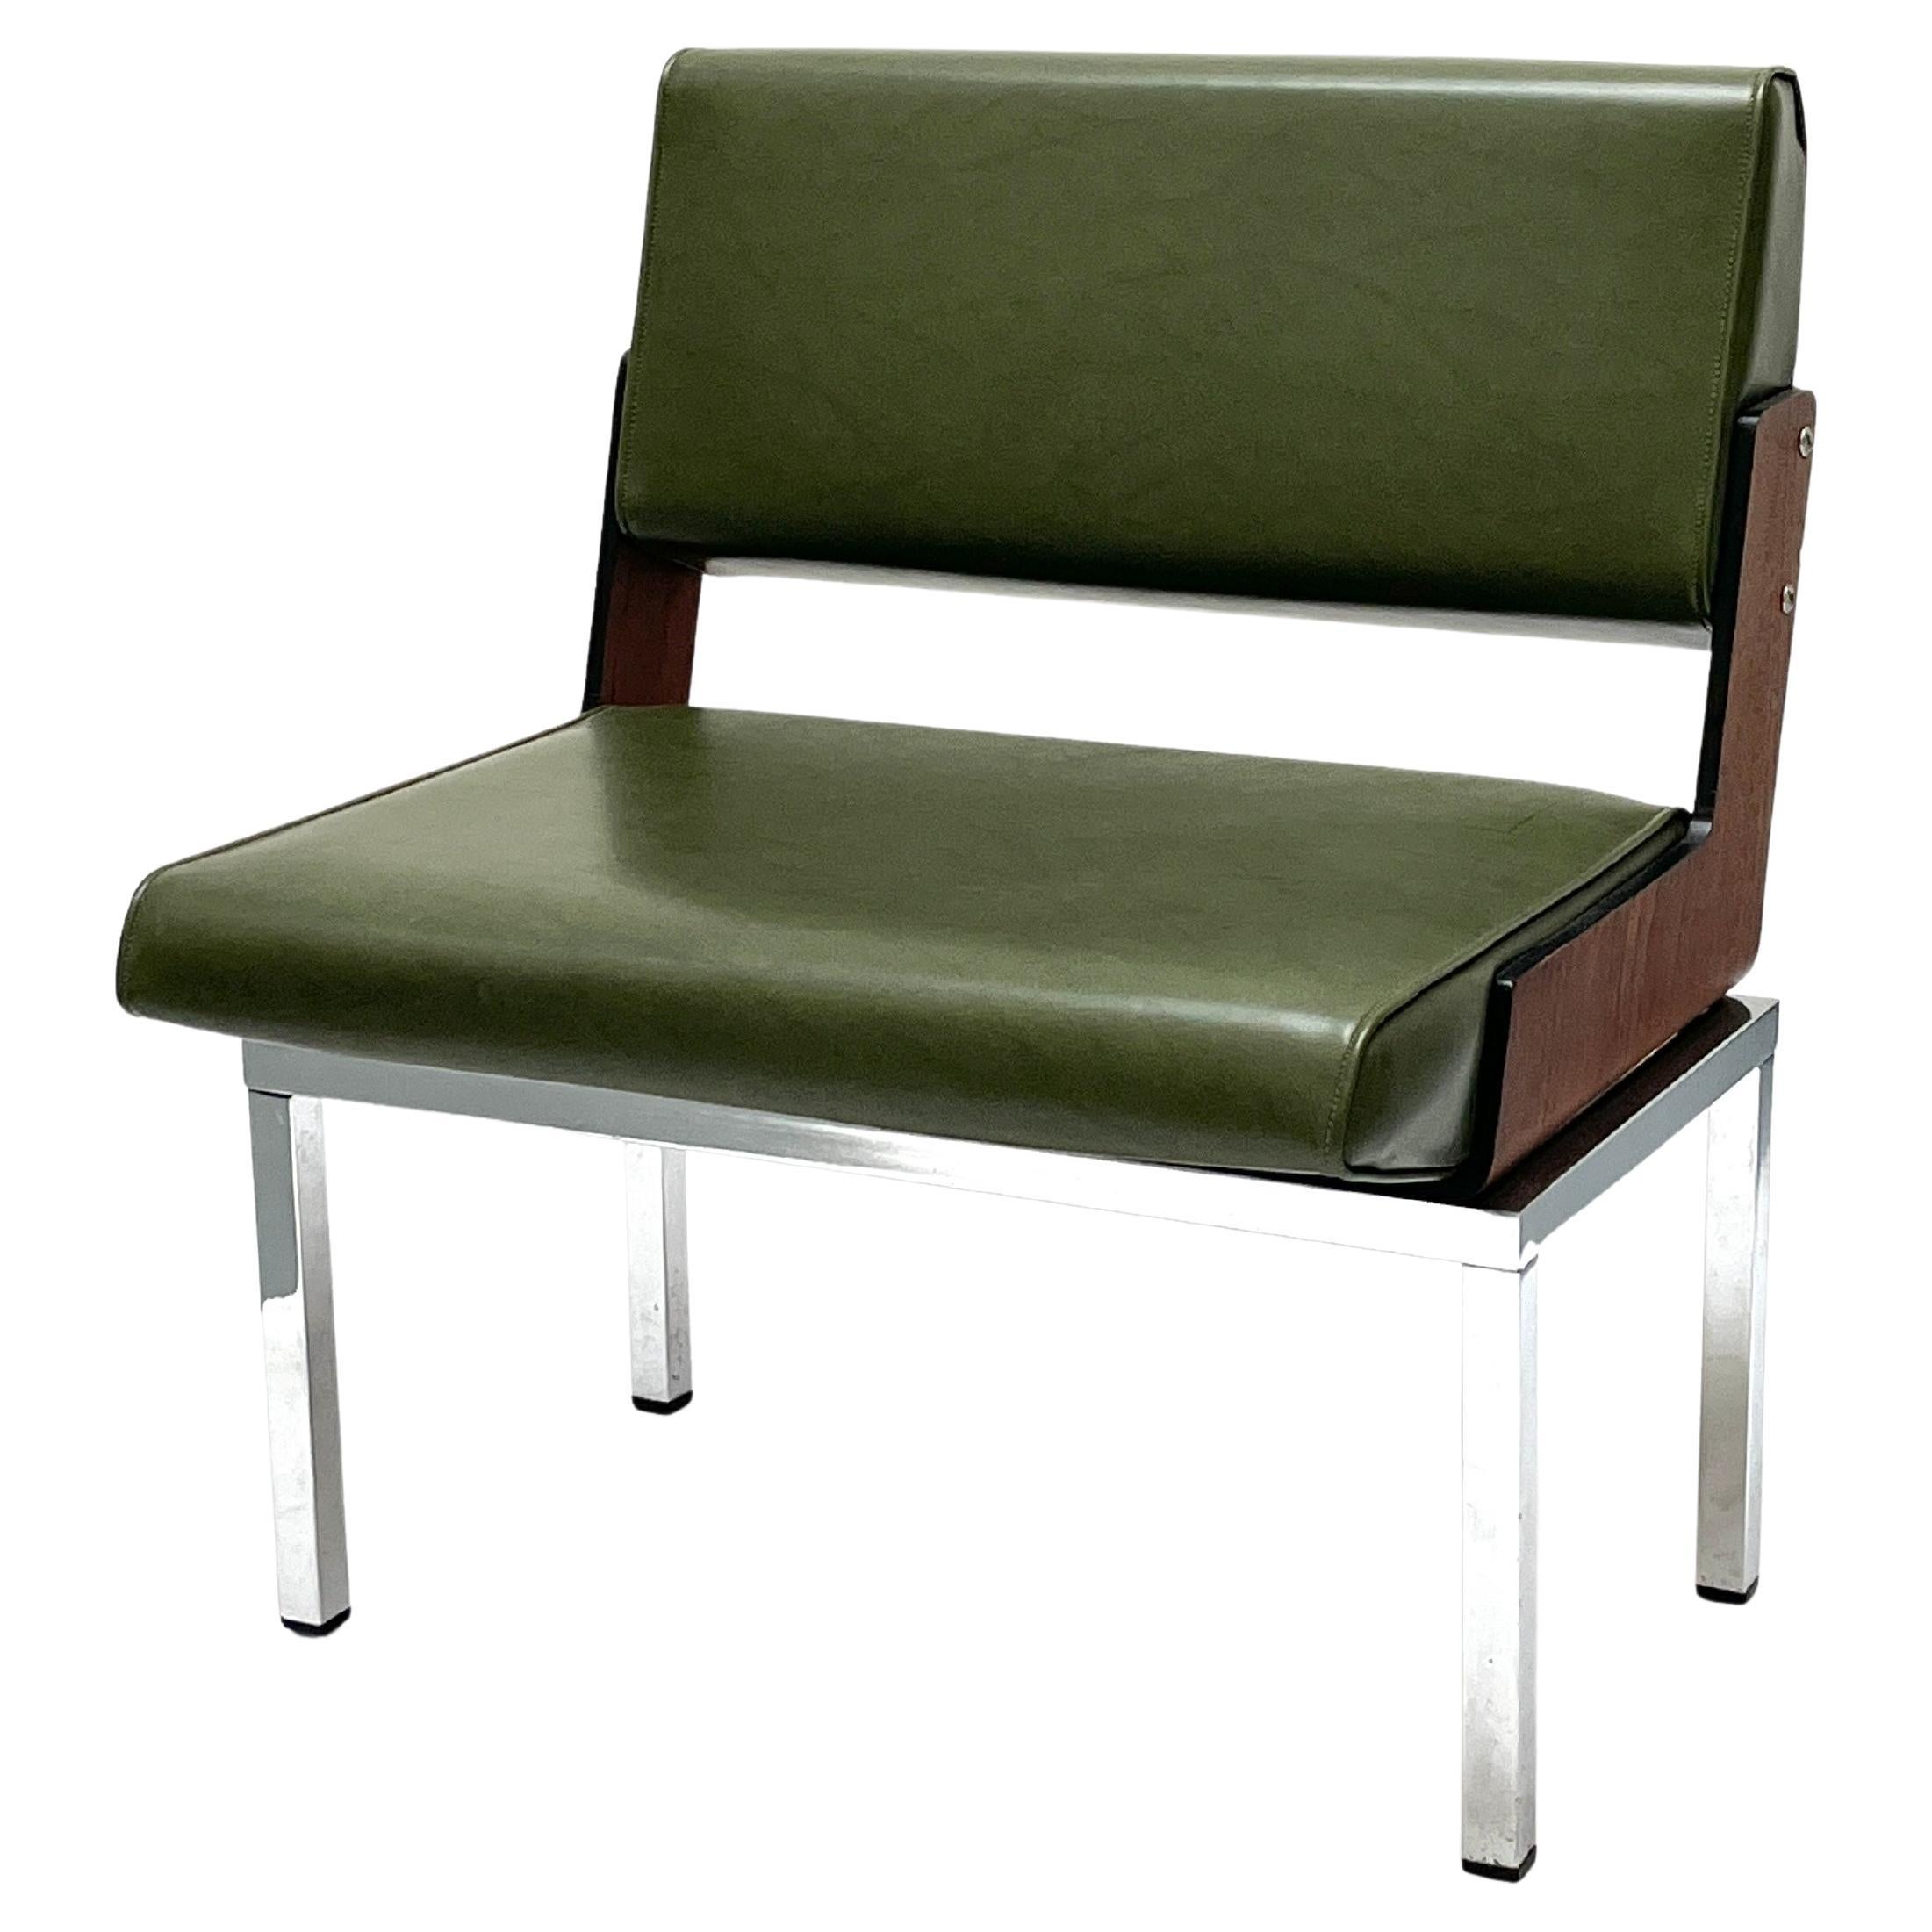 Lounge Chair in Skaï, Metal and Wood by Roger Tallon, Technès, 1966 For Sale